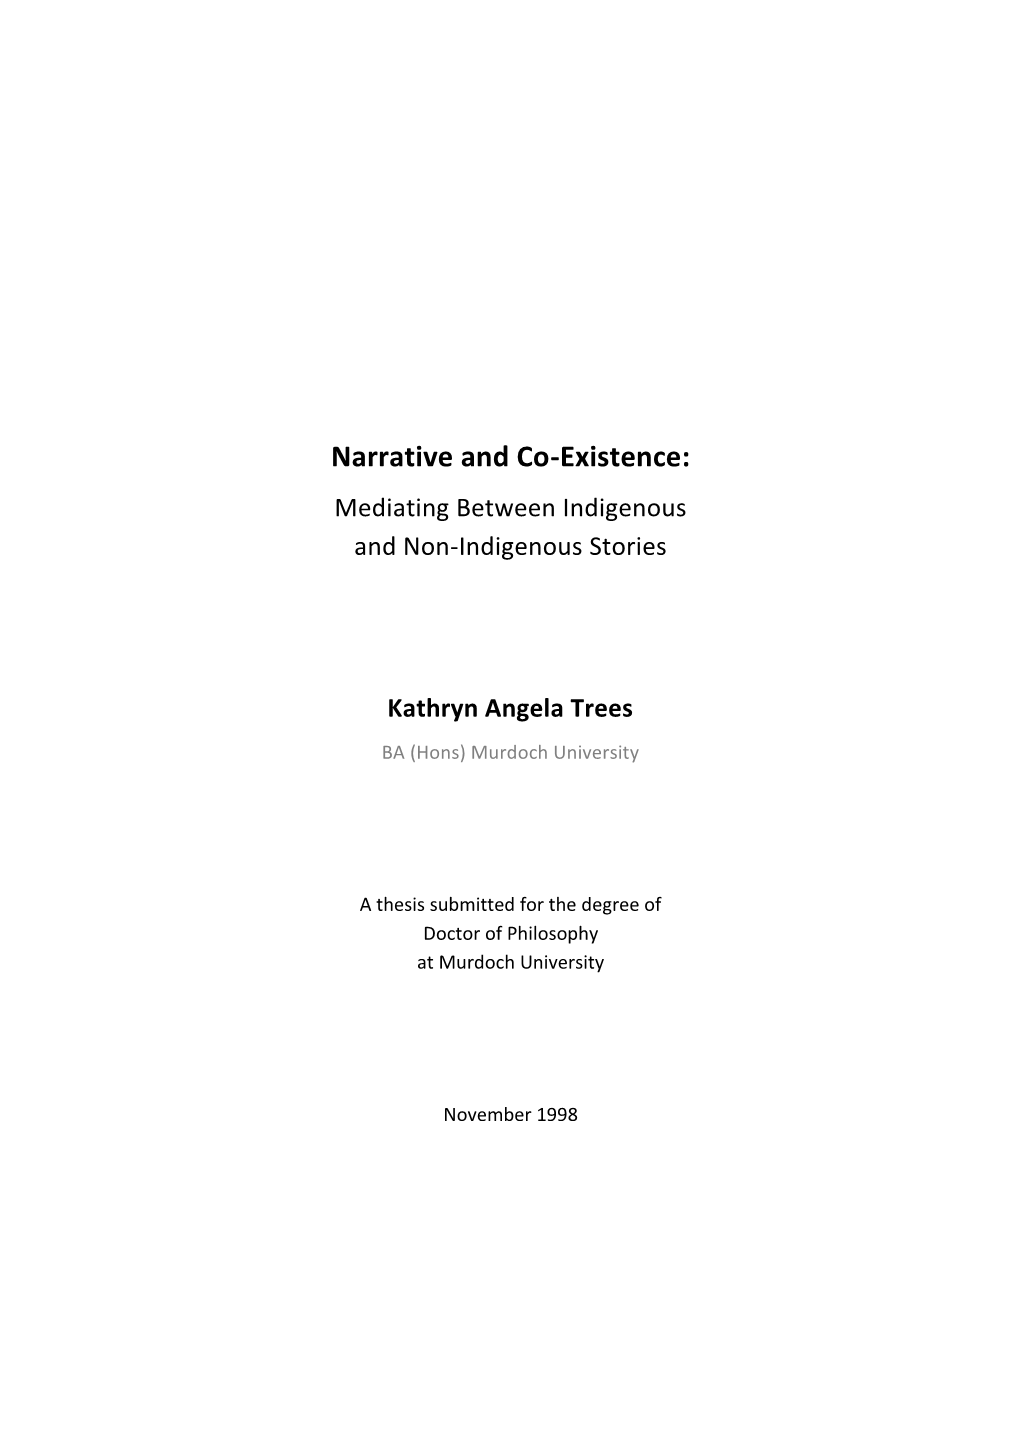 Narrative and Co-Existence: Mediating Between Indigenous and Non-Indigenous Stories